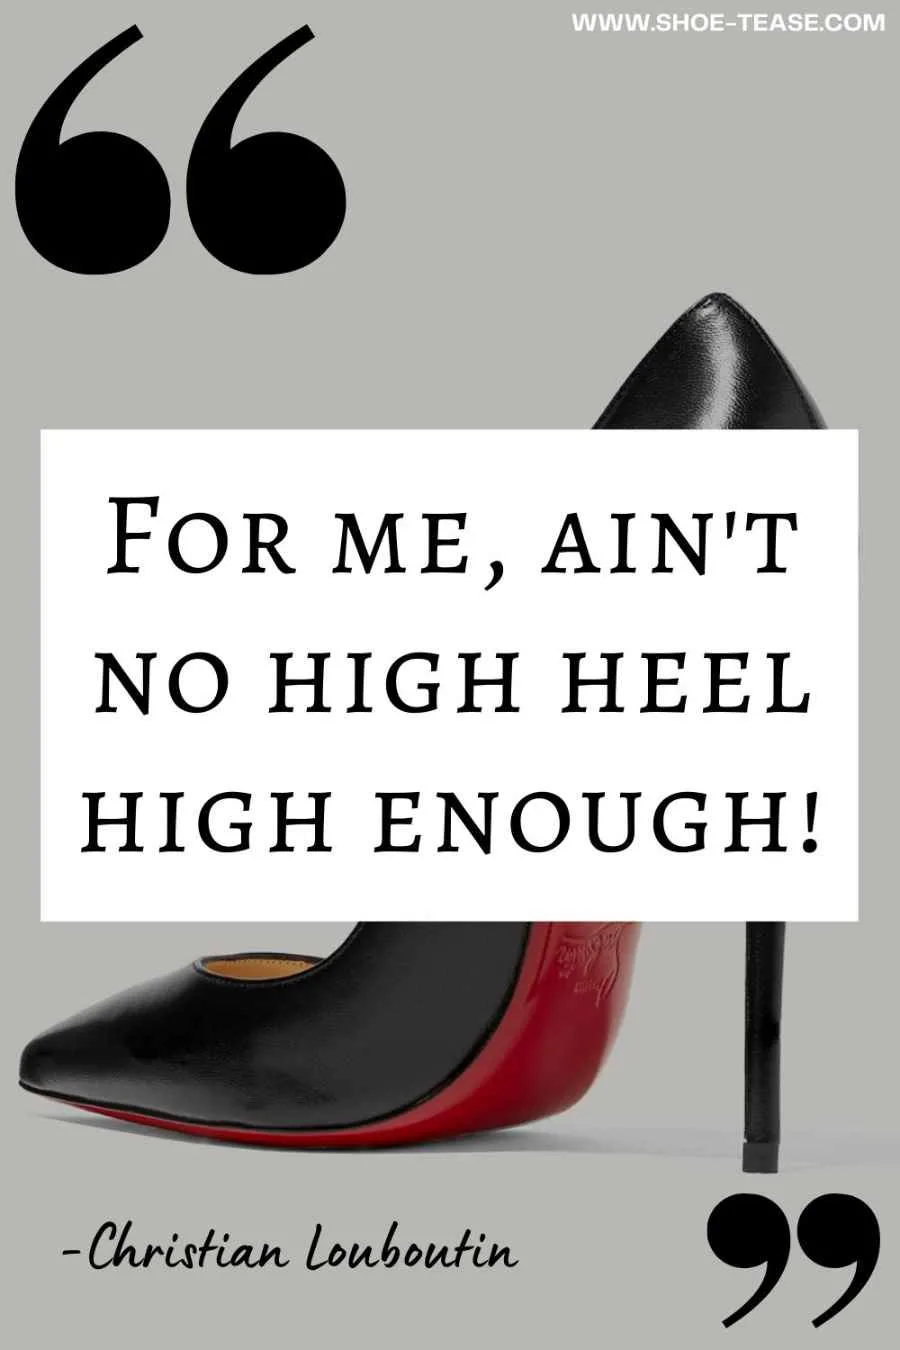 Black text in white box reading " For me, ain't no high heel high enough" by Christian Louboutin, over image of Black Pigalle stiletto leather pumps with red soles.